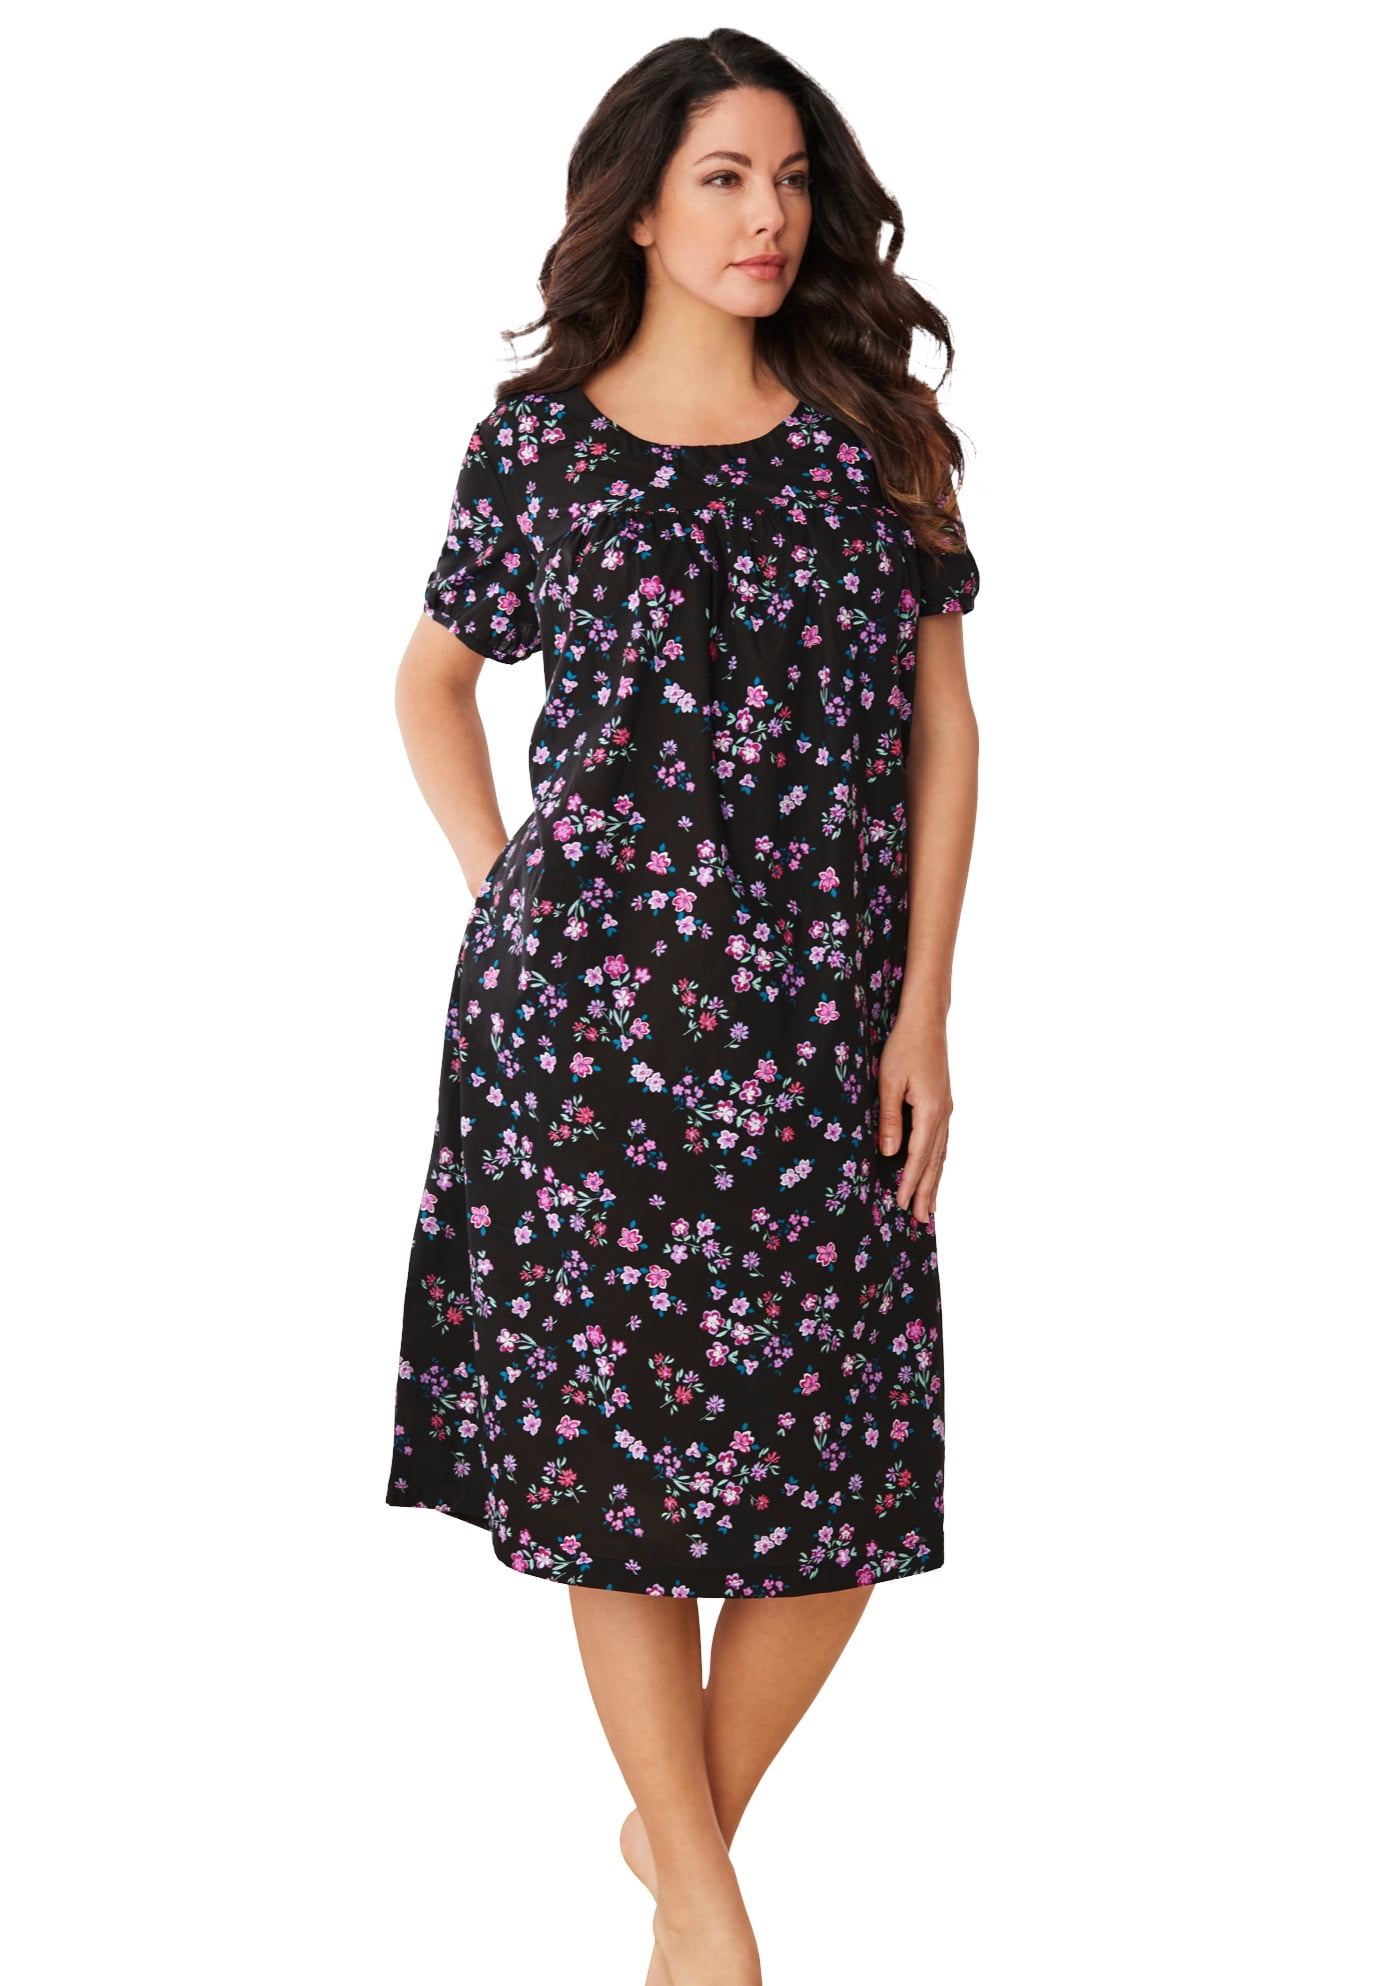 Only Necessities Women's Plus Size Short Print Shirred Dress or ...